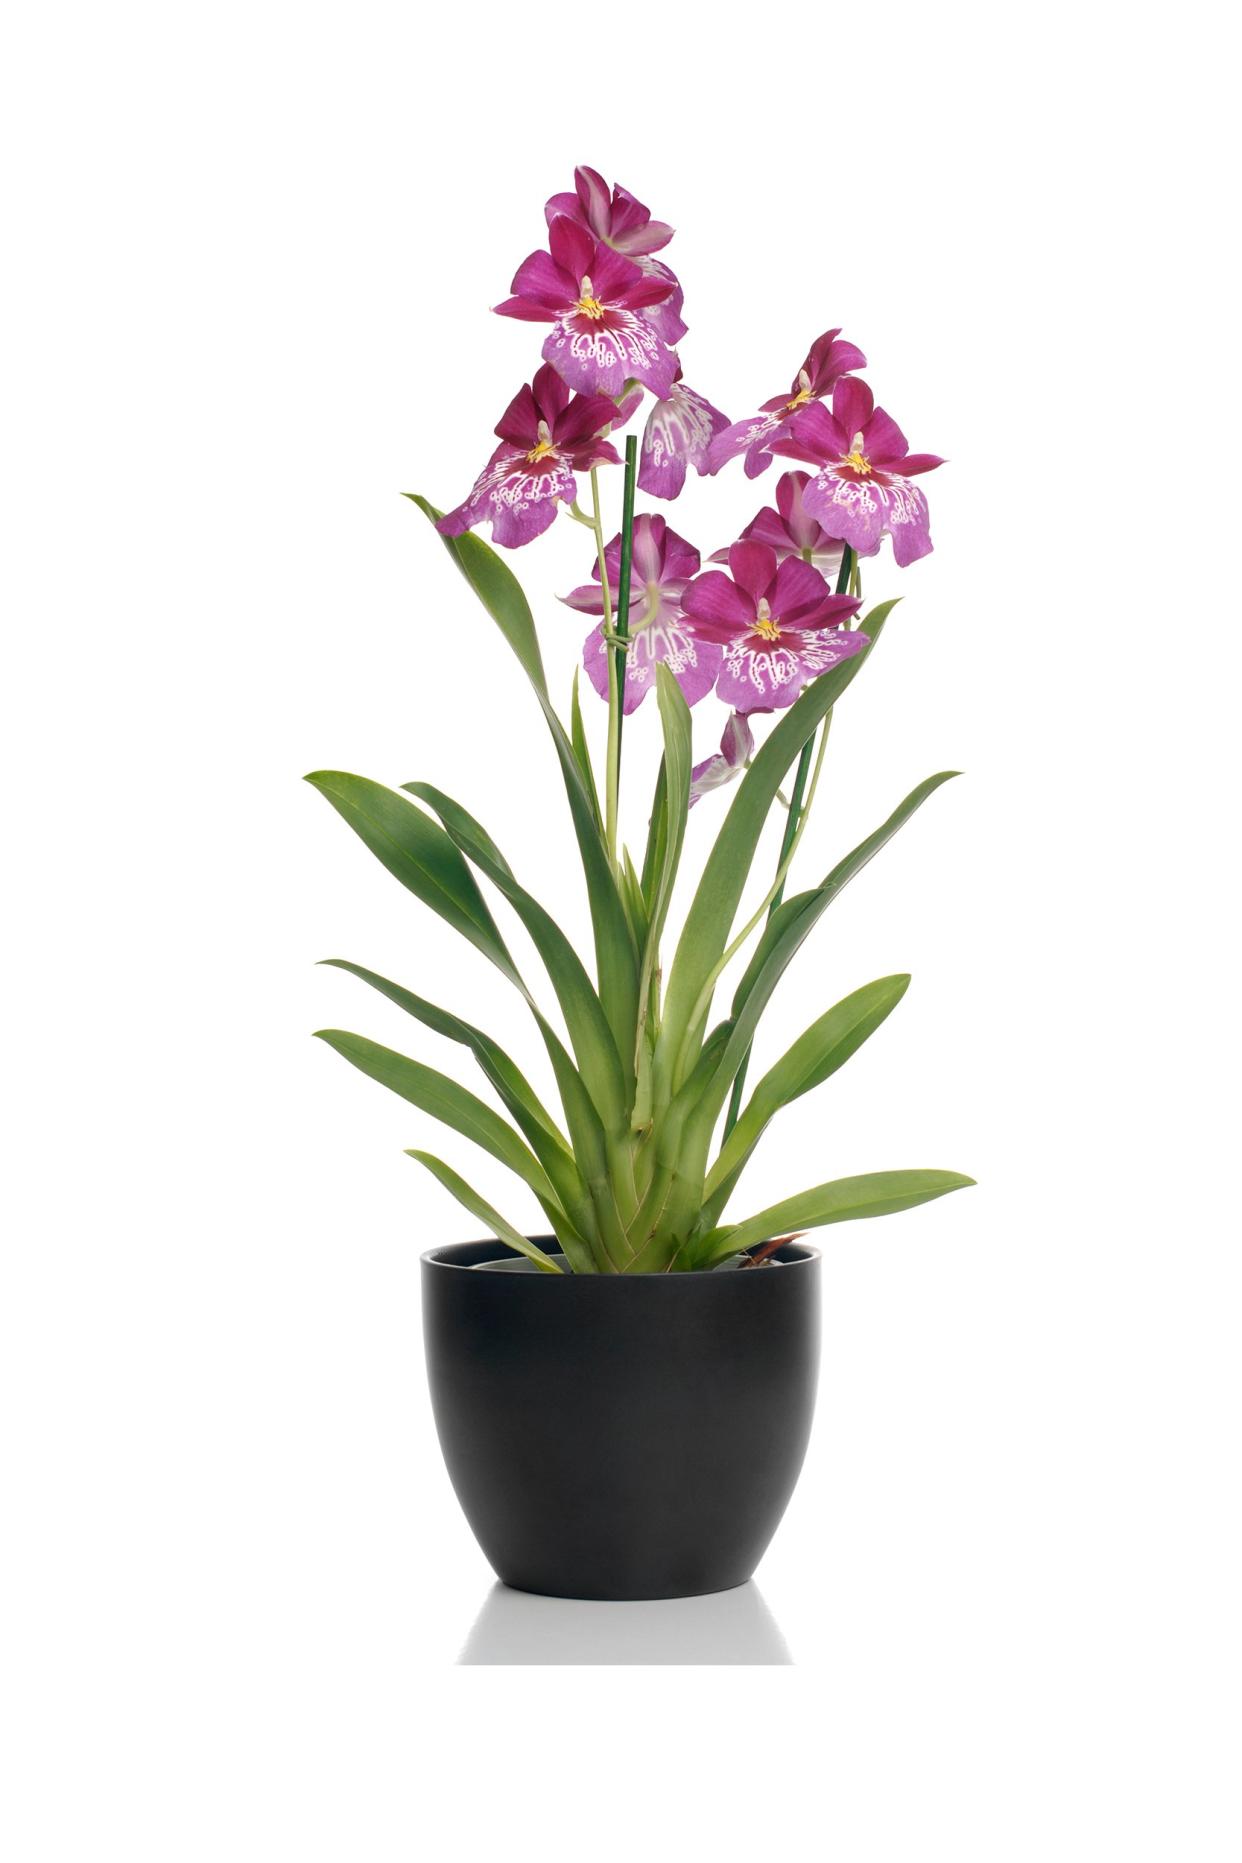 Purple orchid in a vase